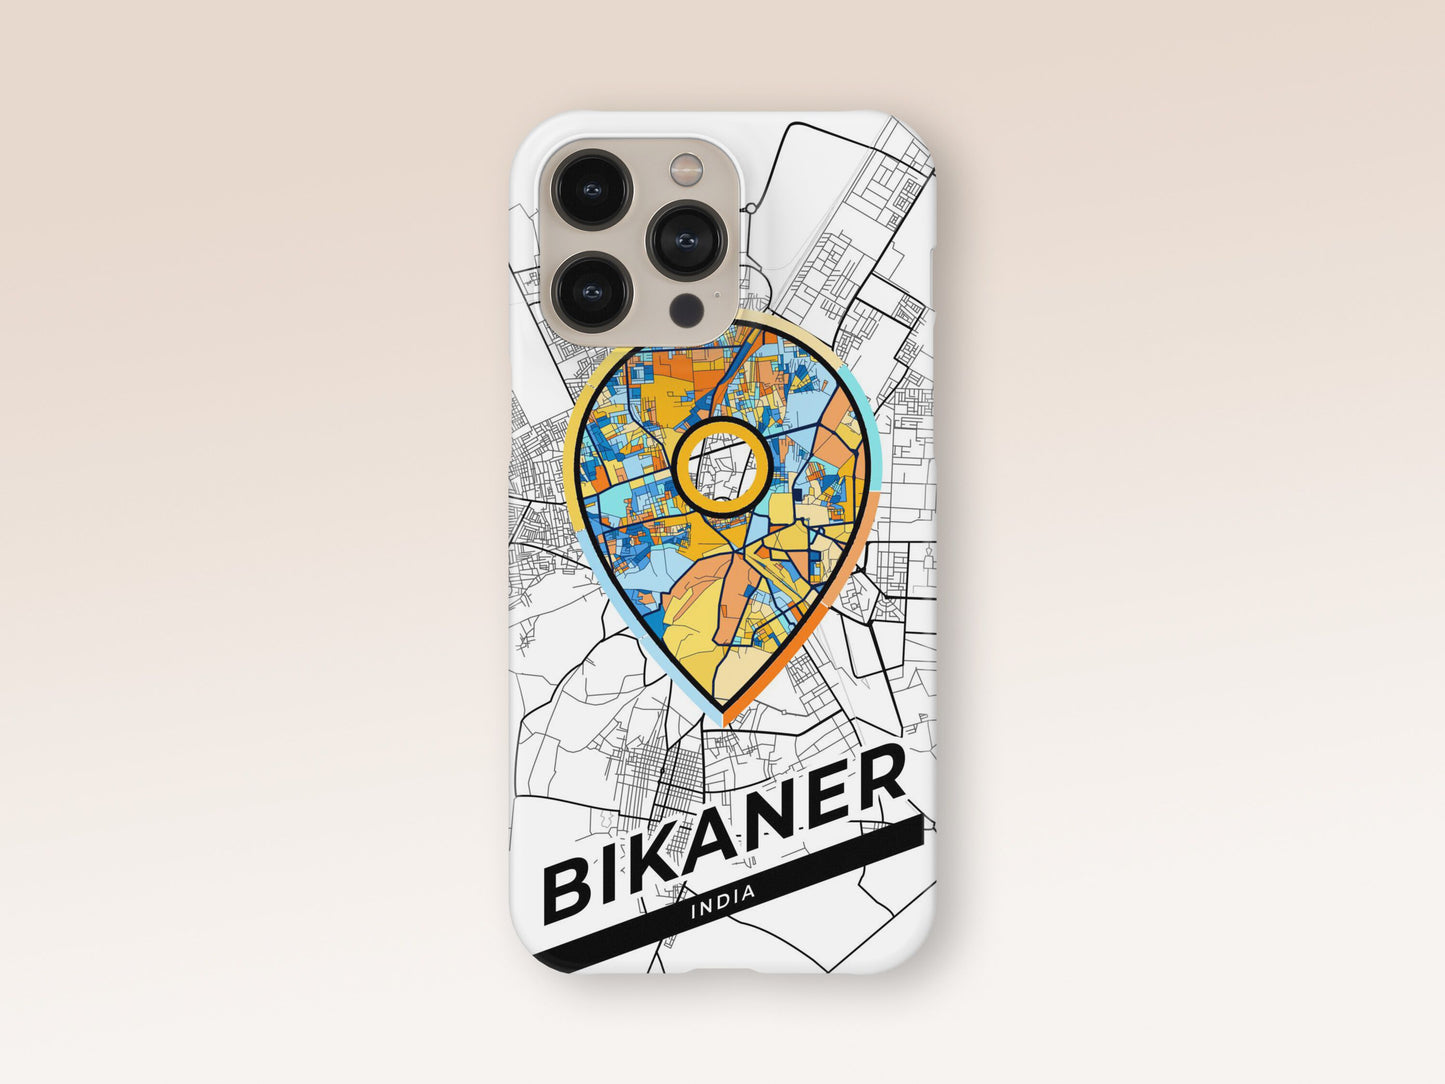 Bikaner India slim phone case with colorful icon. Birthday, wedding or housewarming gift. Couple match cases. 1